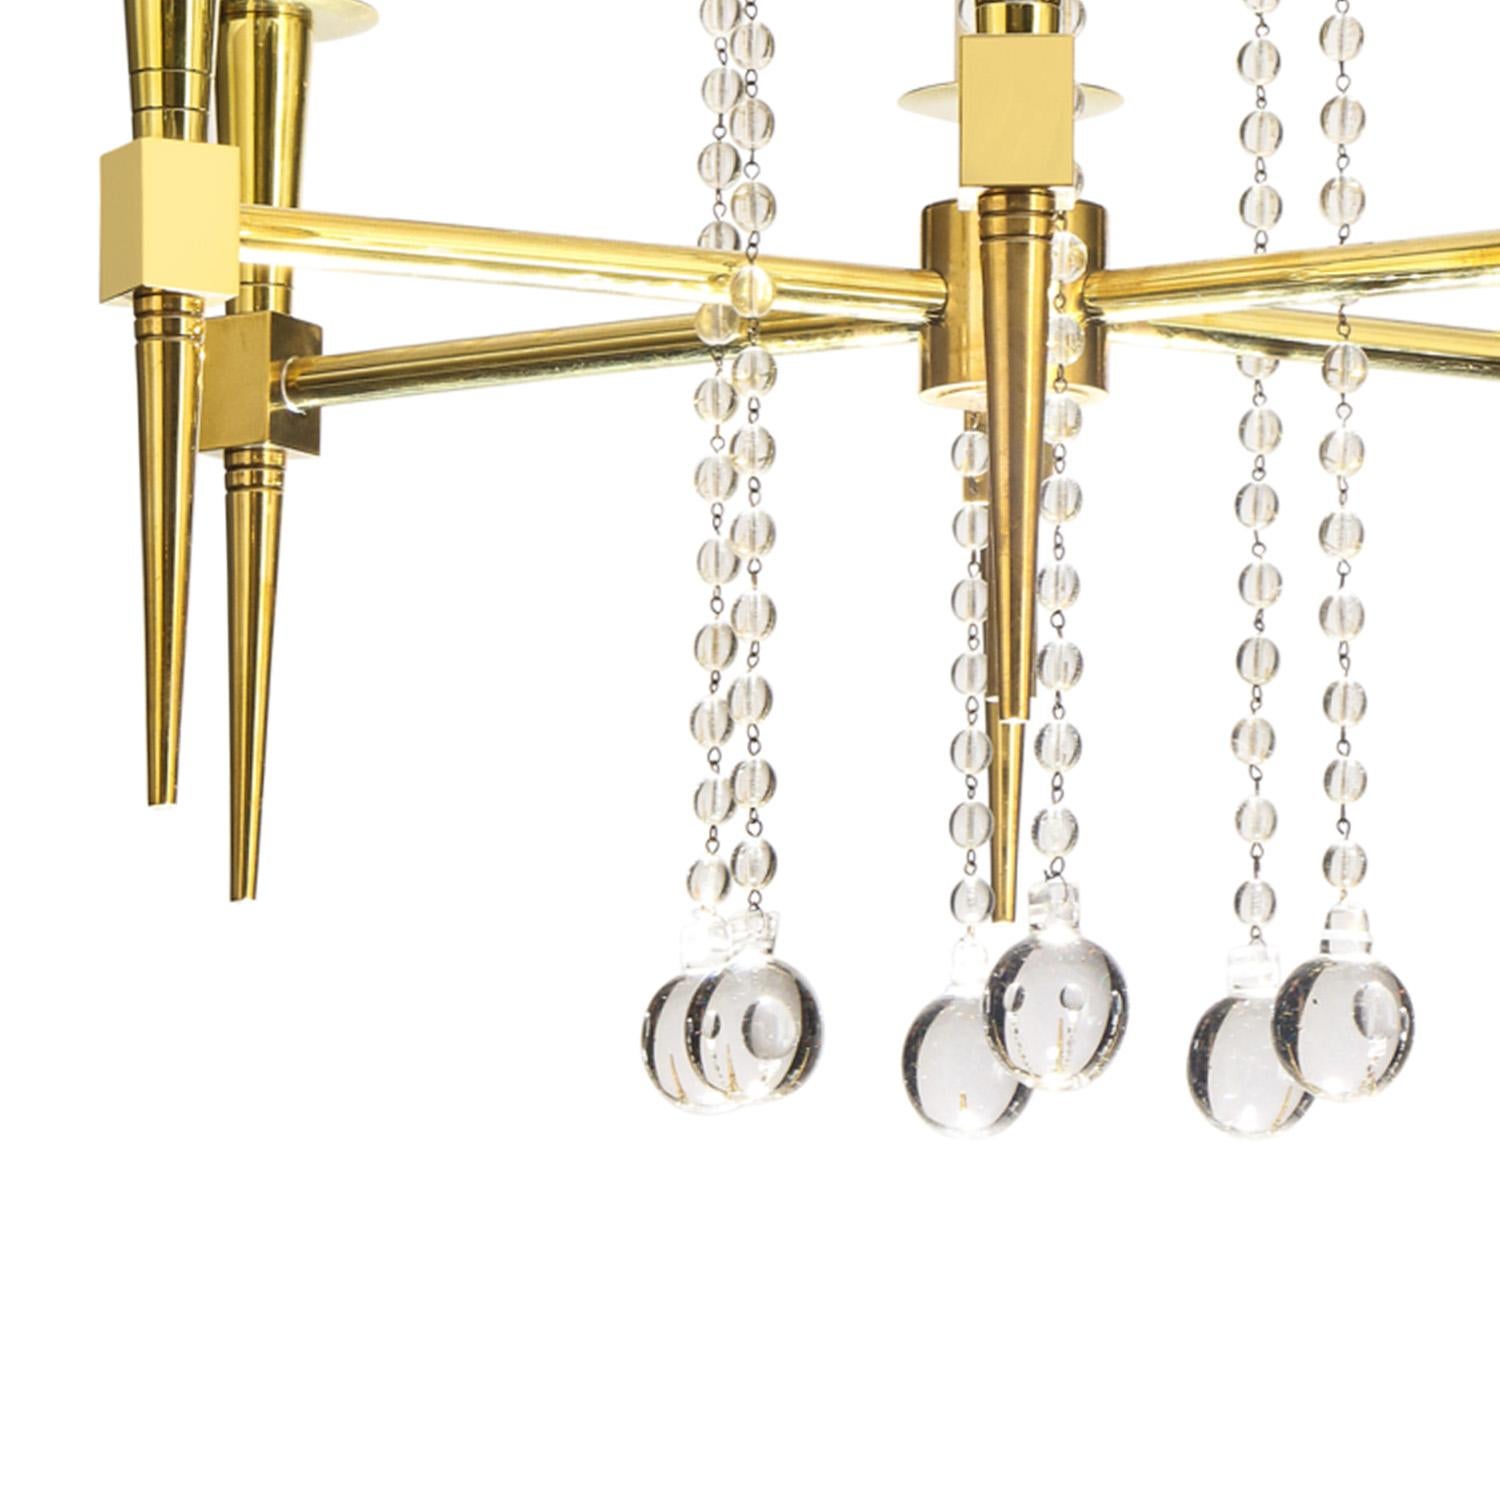 Hand-Crafted Tommi Parzinger Elegant 6 Arm Chandelier in Brass and Crystal 1950s For Sale